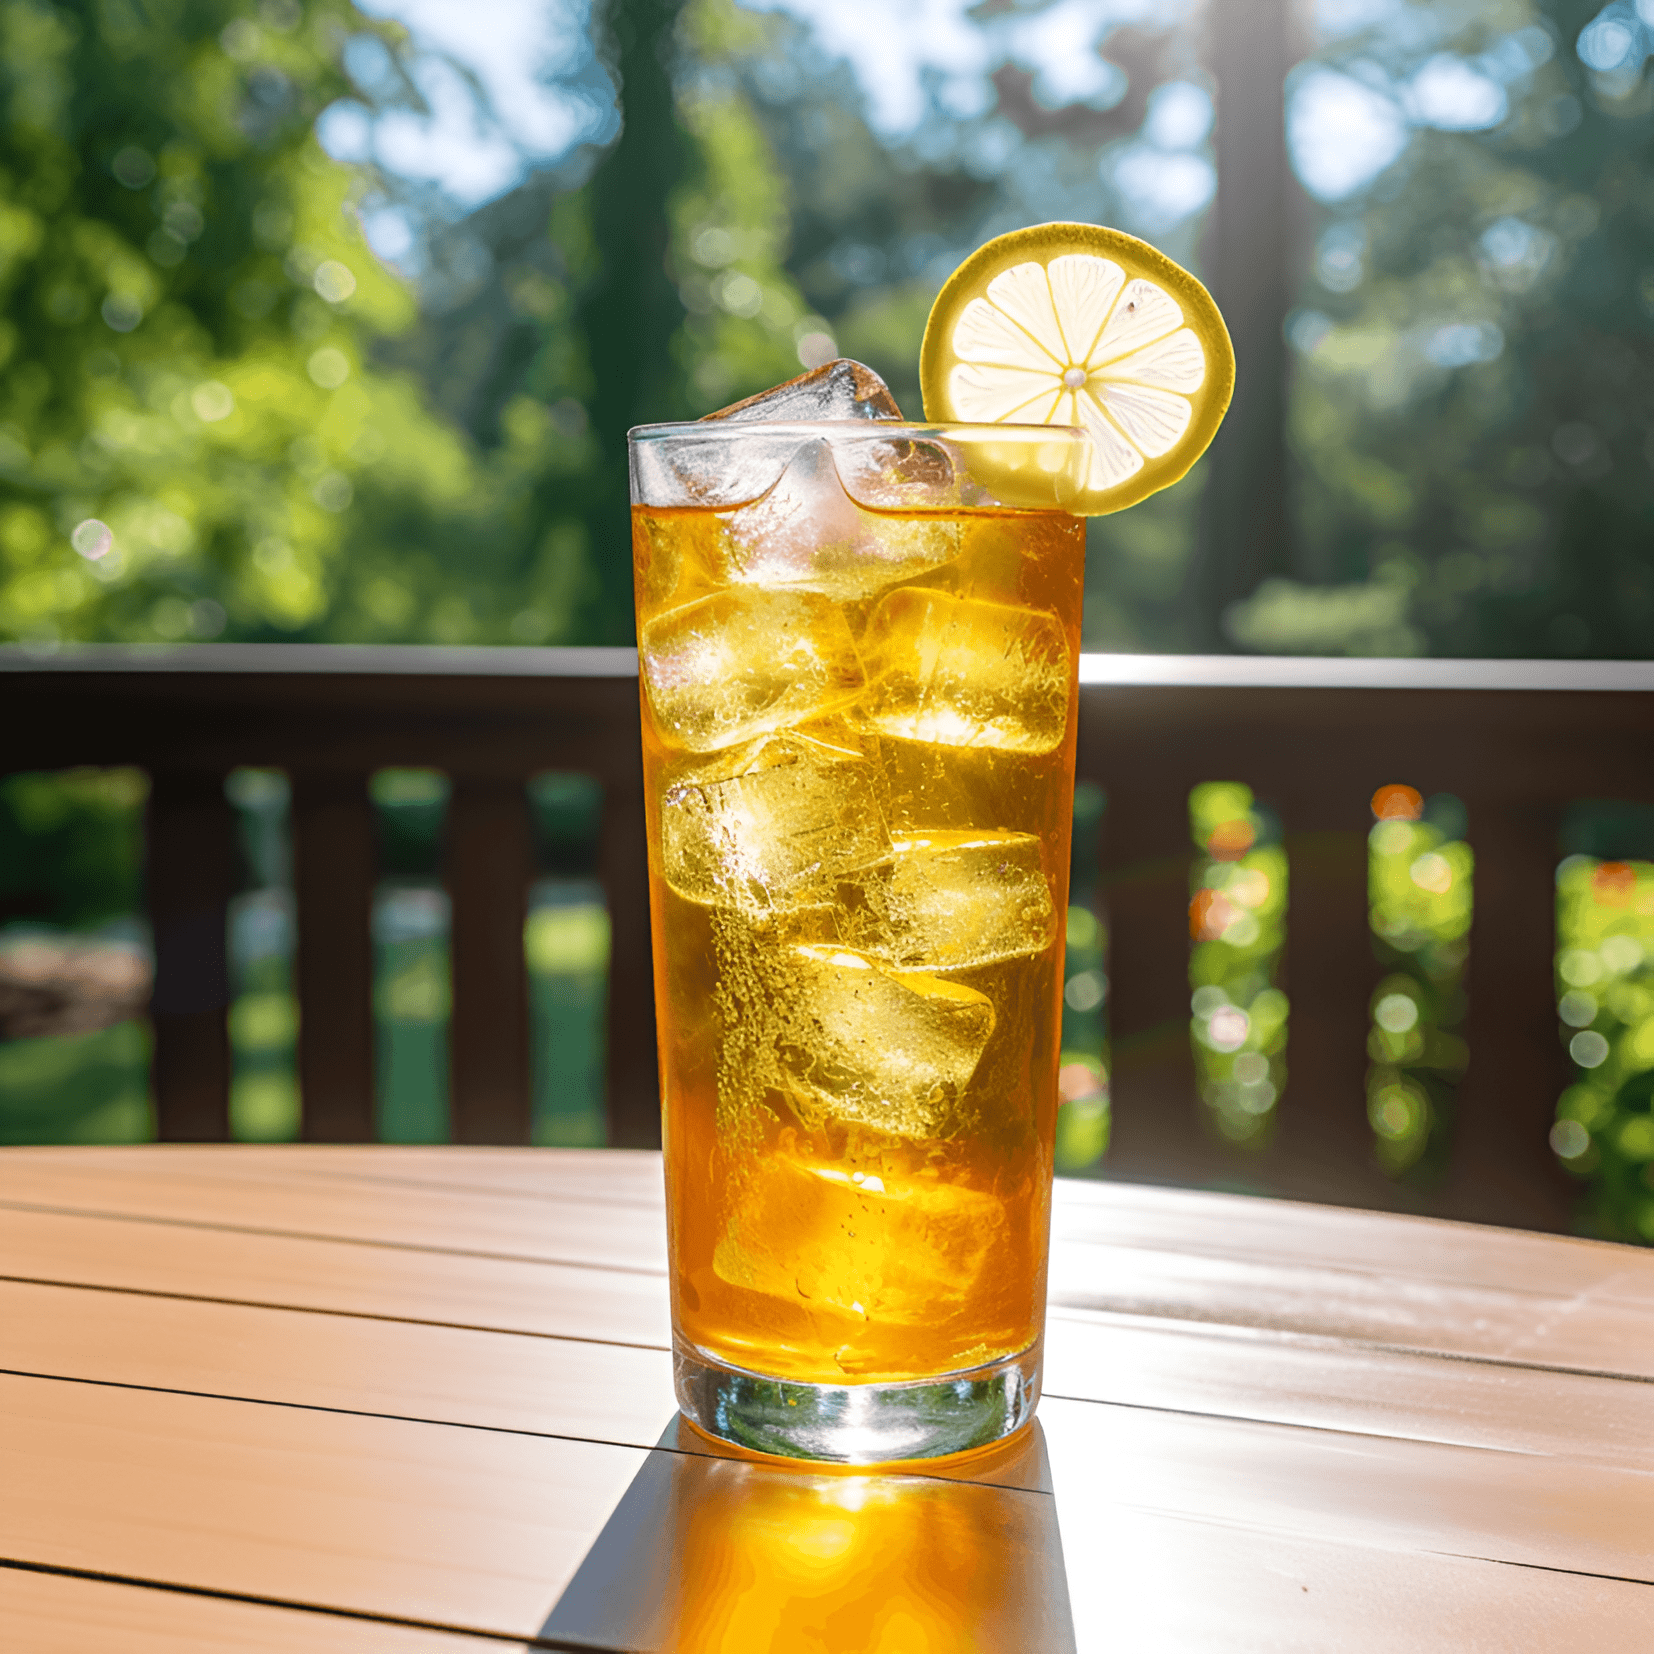 The Dixie Dew is a refreshing, fruity, and slightly sweet cocktail with a hint of tartness. The combination of citrus and peach flavors creates a well-balanced, smooth, and easy-to-drink beverage.